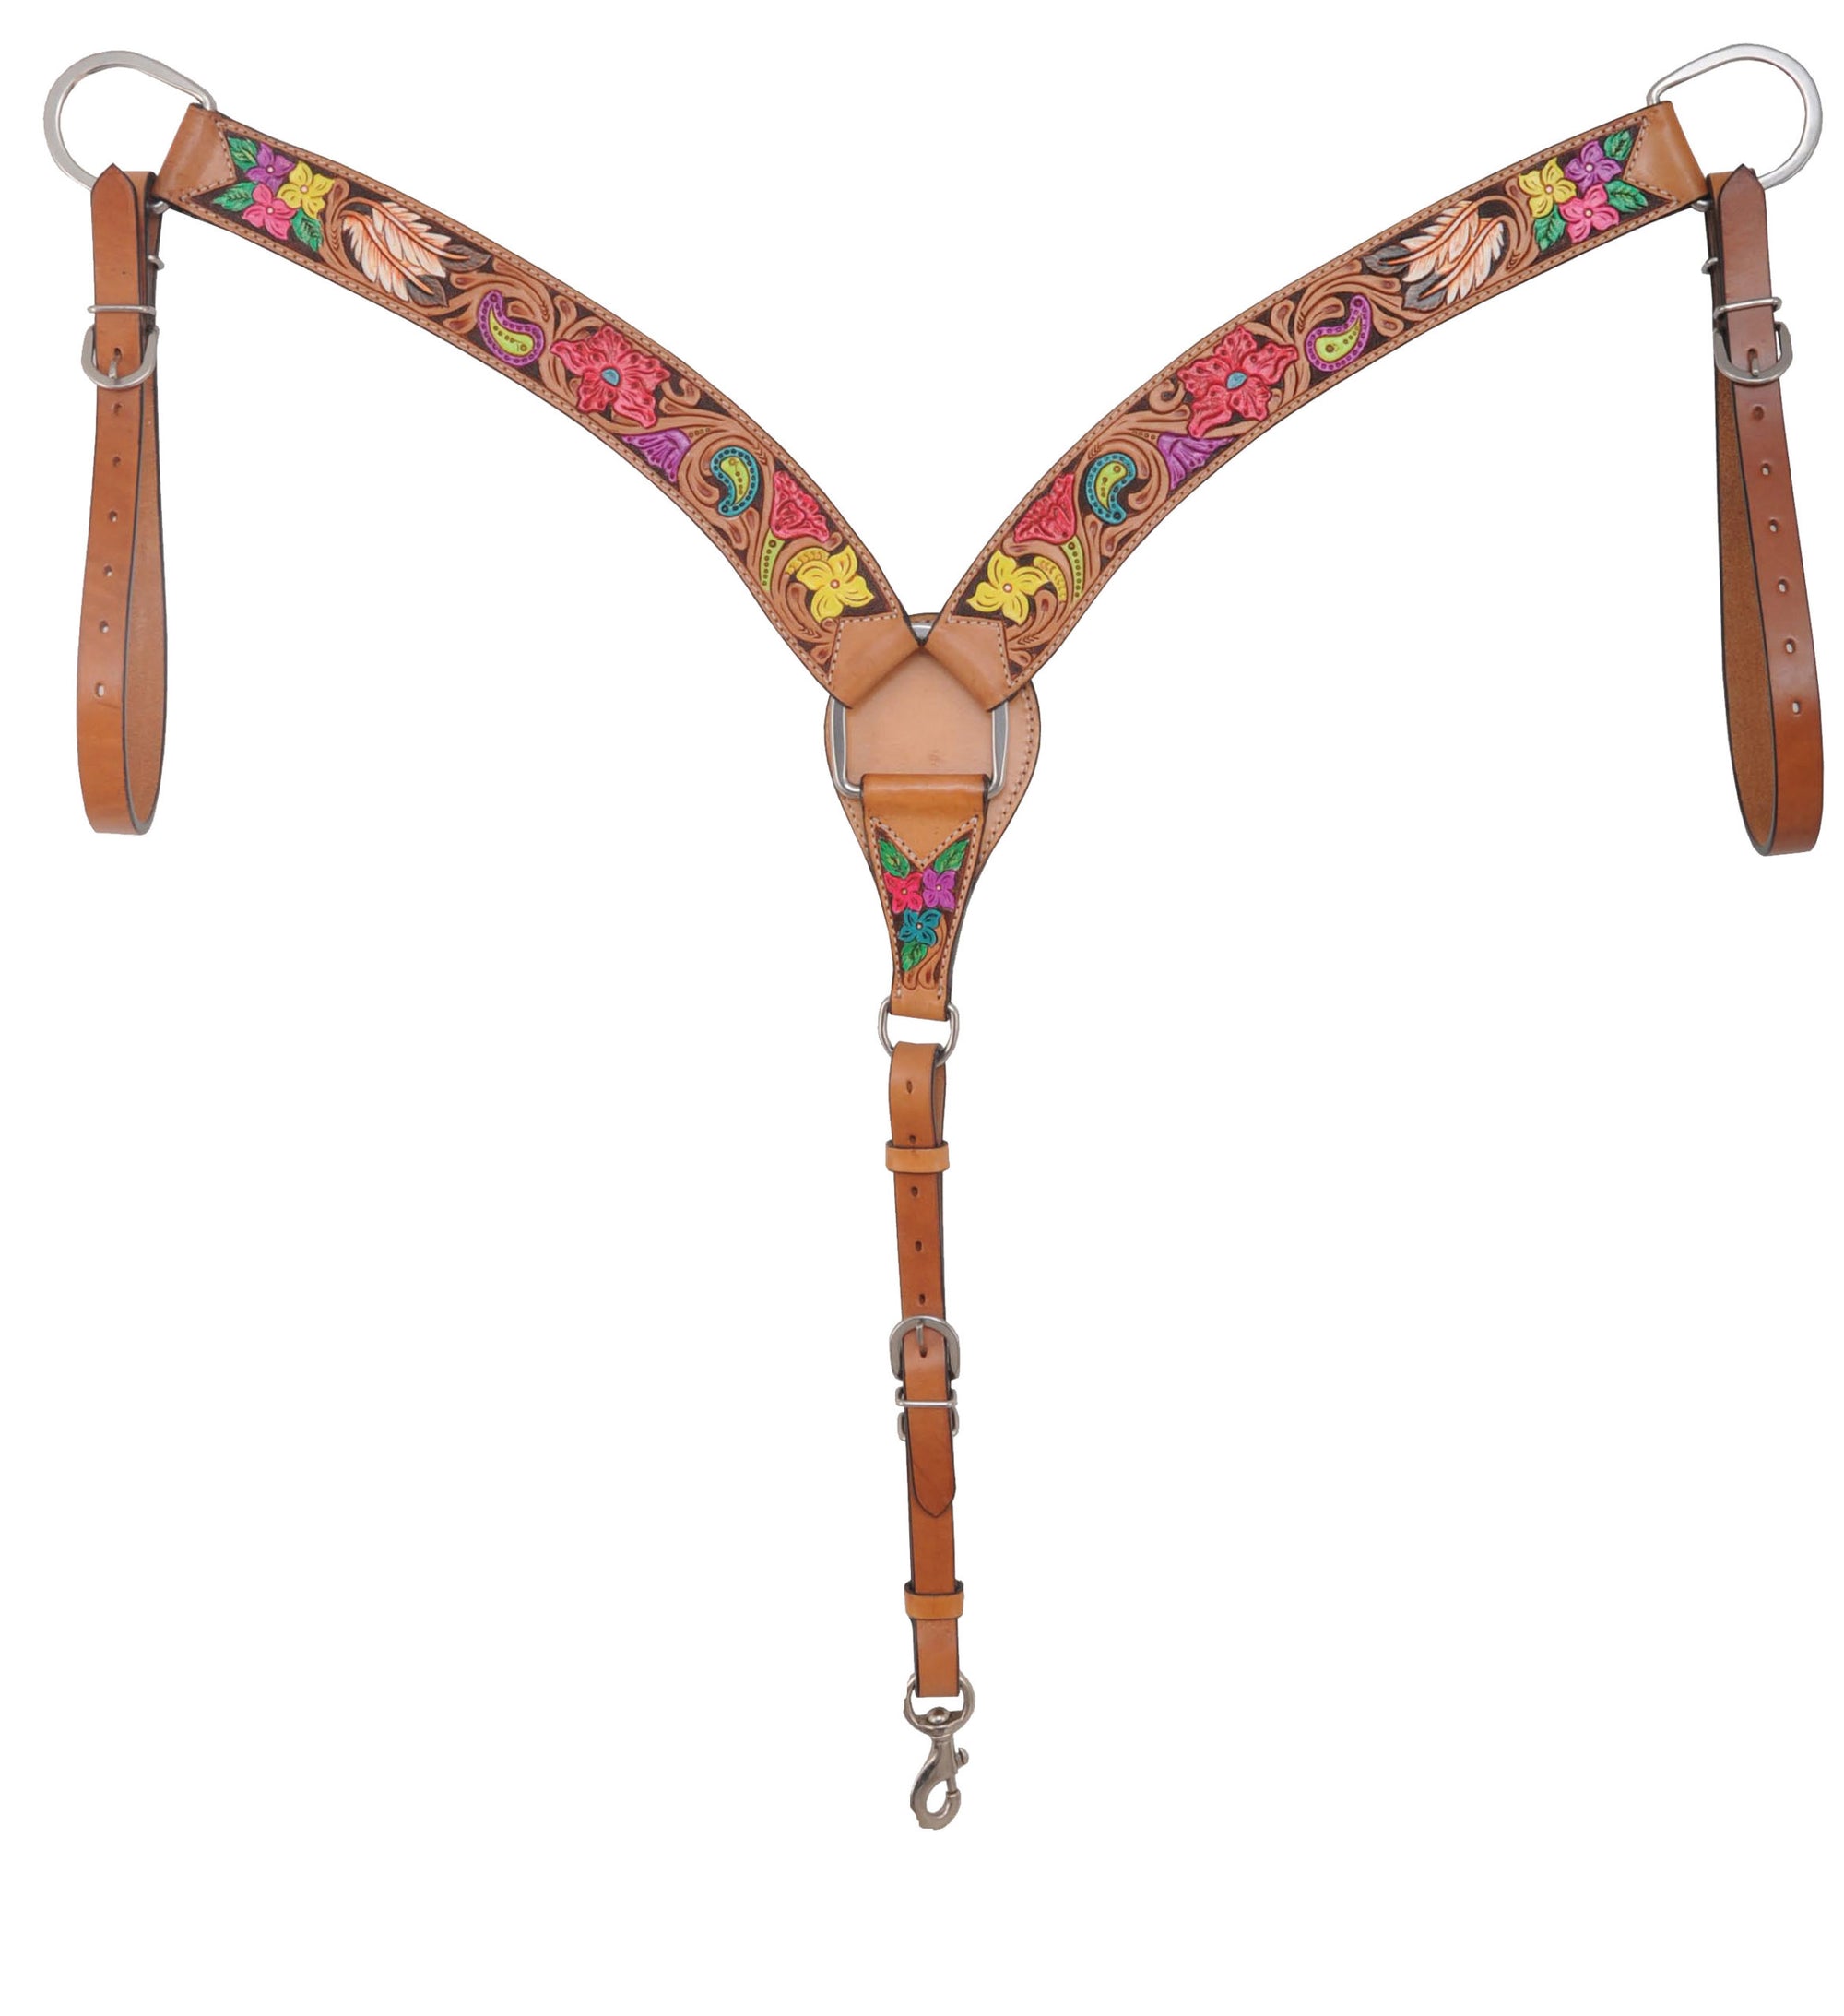 Rafter T Ranch Breastplate Flower Tooling